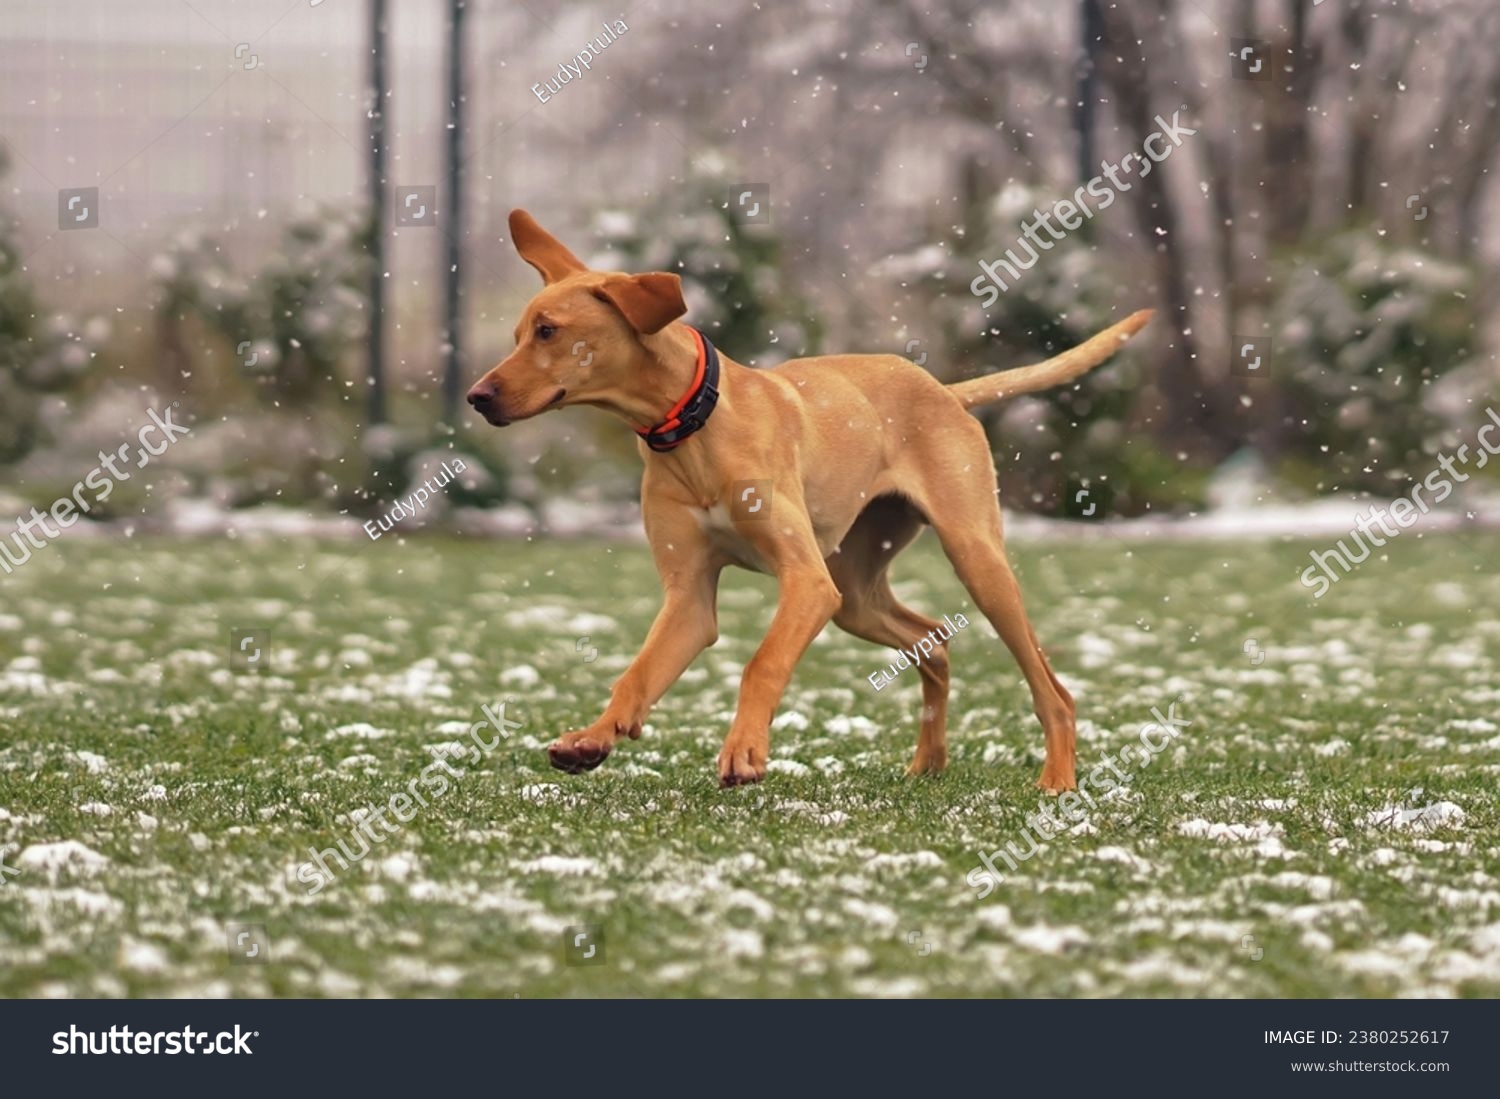 Funny beige and white 6-month-old Eurohound (European sled dog) puppy with an orange collar posing outdoors running fast on a green grass while snowing in autumn #2380252617